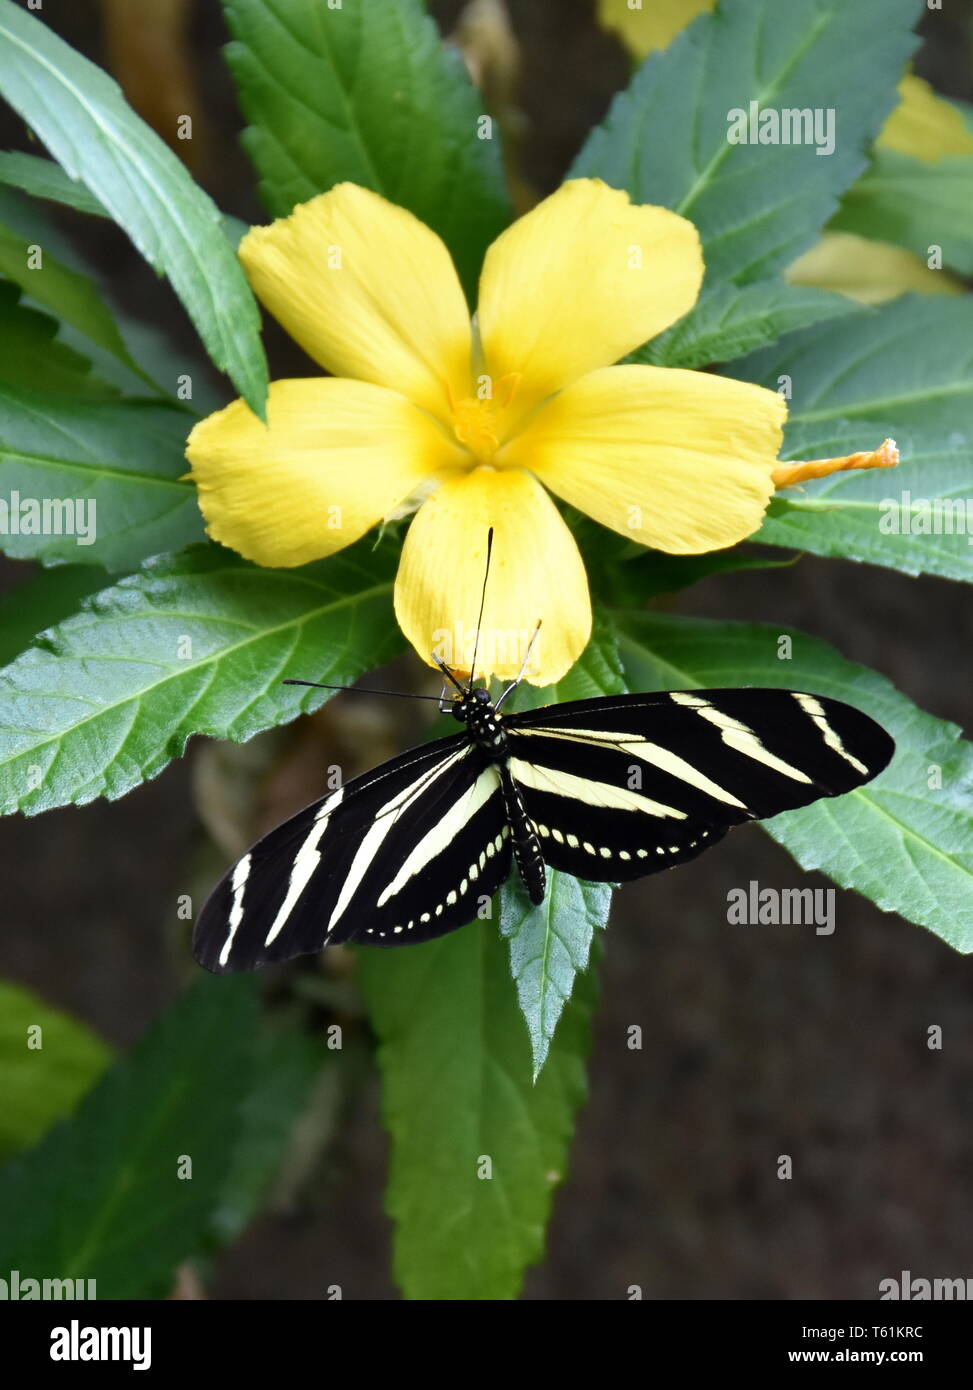 The zebra longwing butterfly Heliconius charithonia on a yellow flower Stock Photo